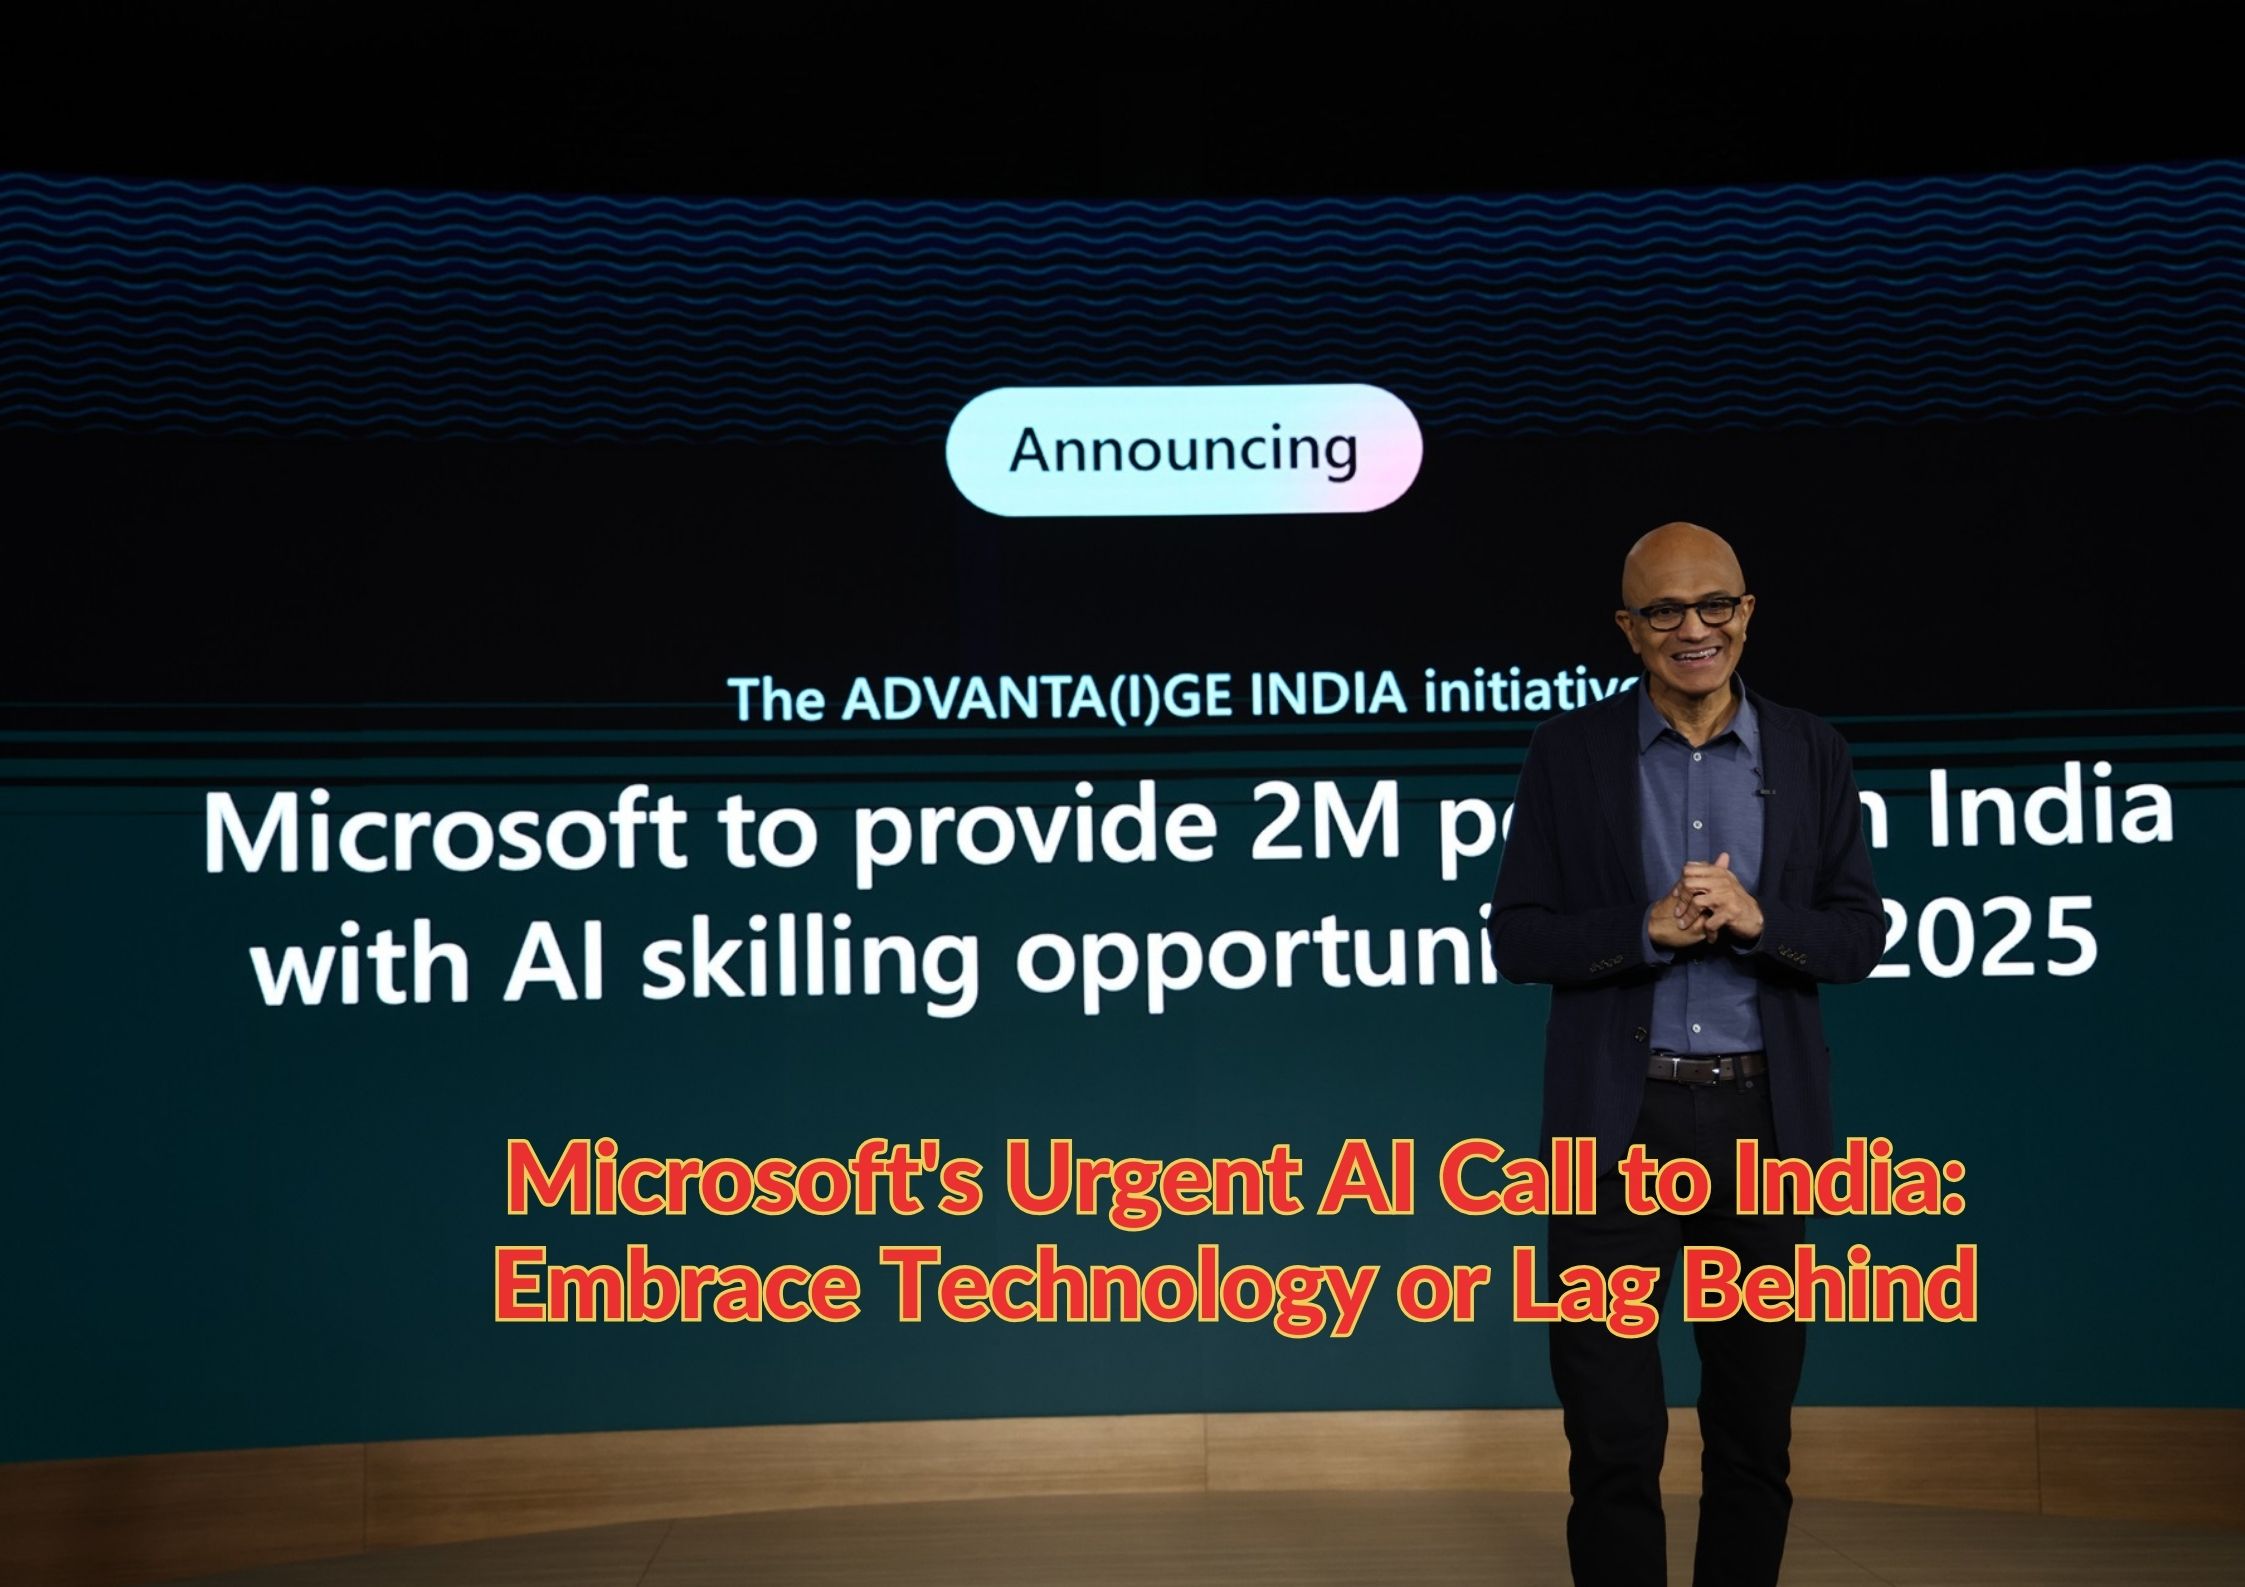 Microsoft's Urgent AI Call to India: Embrace Technology or Lag Behind